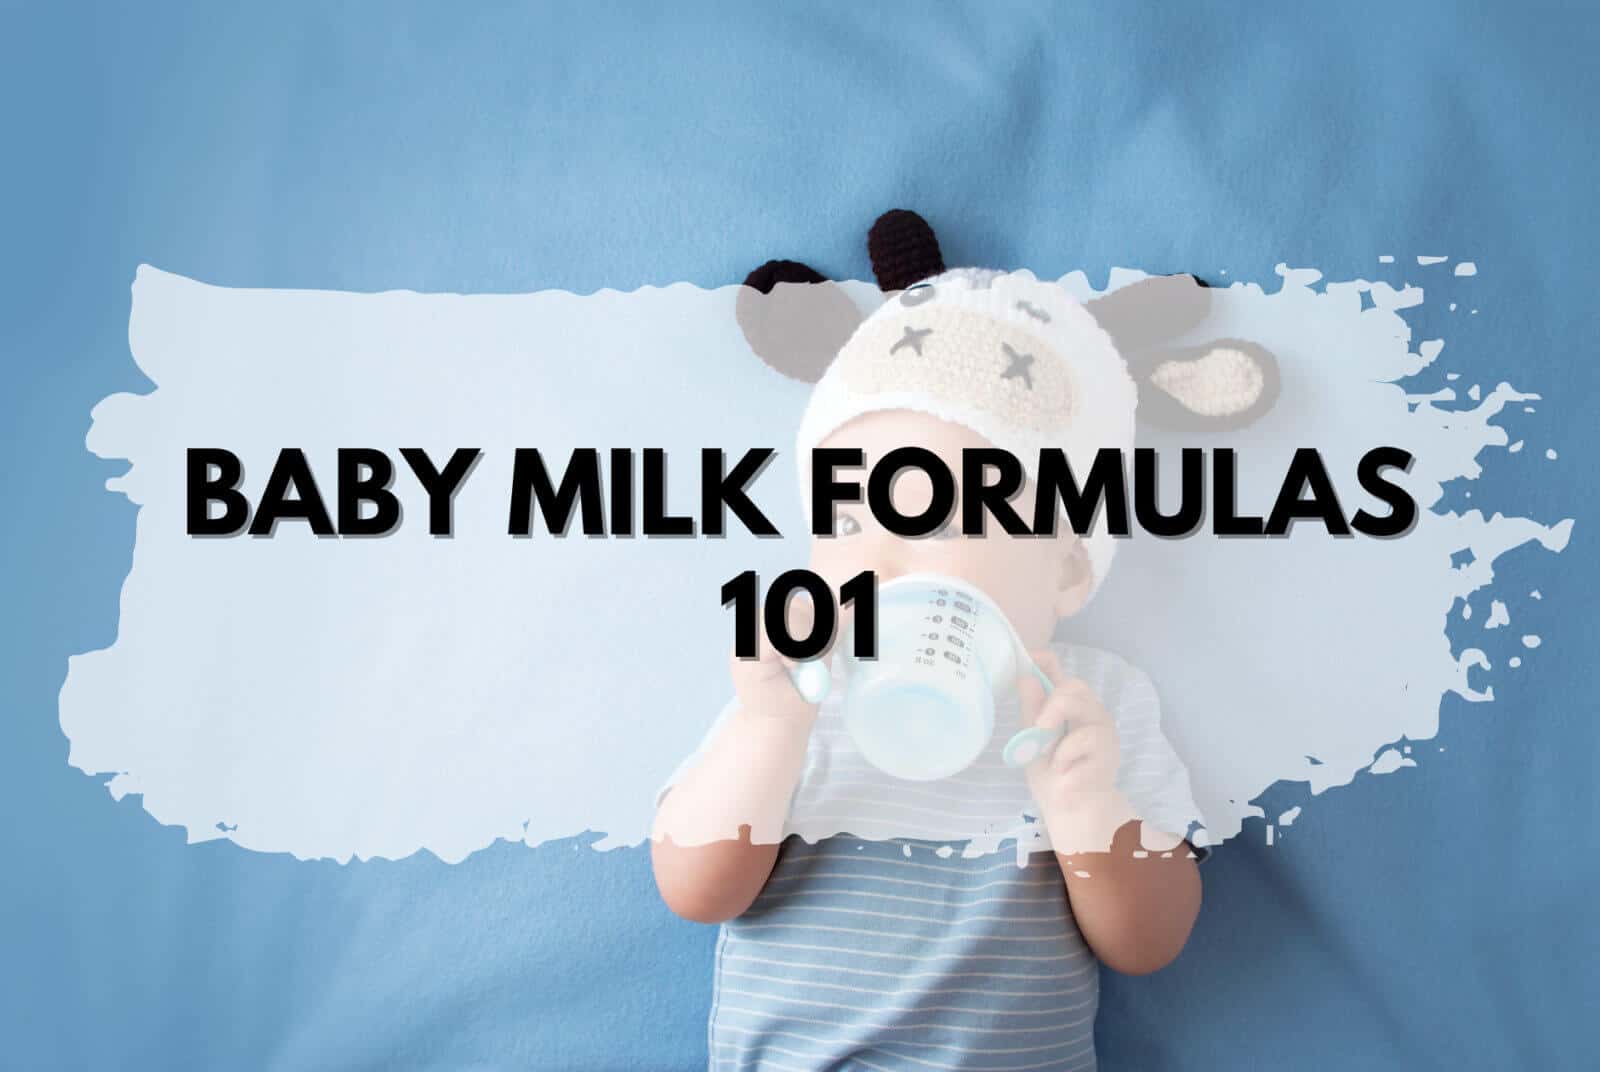 Which baby milk formula is best for your baby?